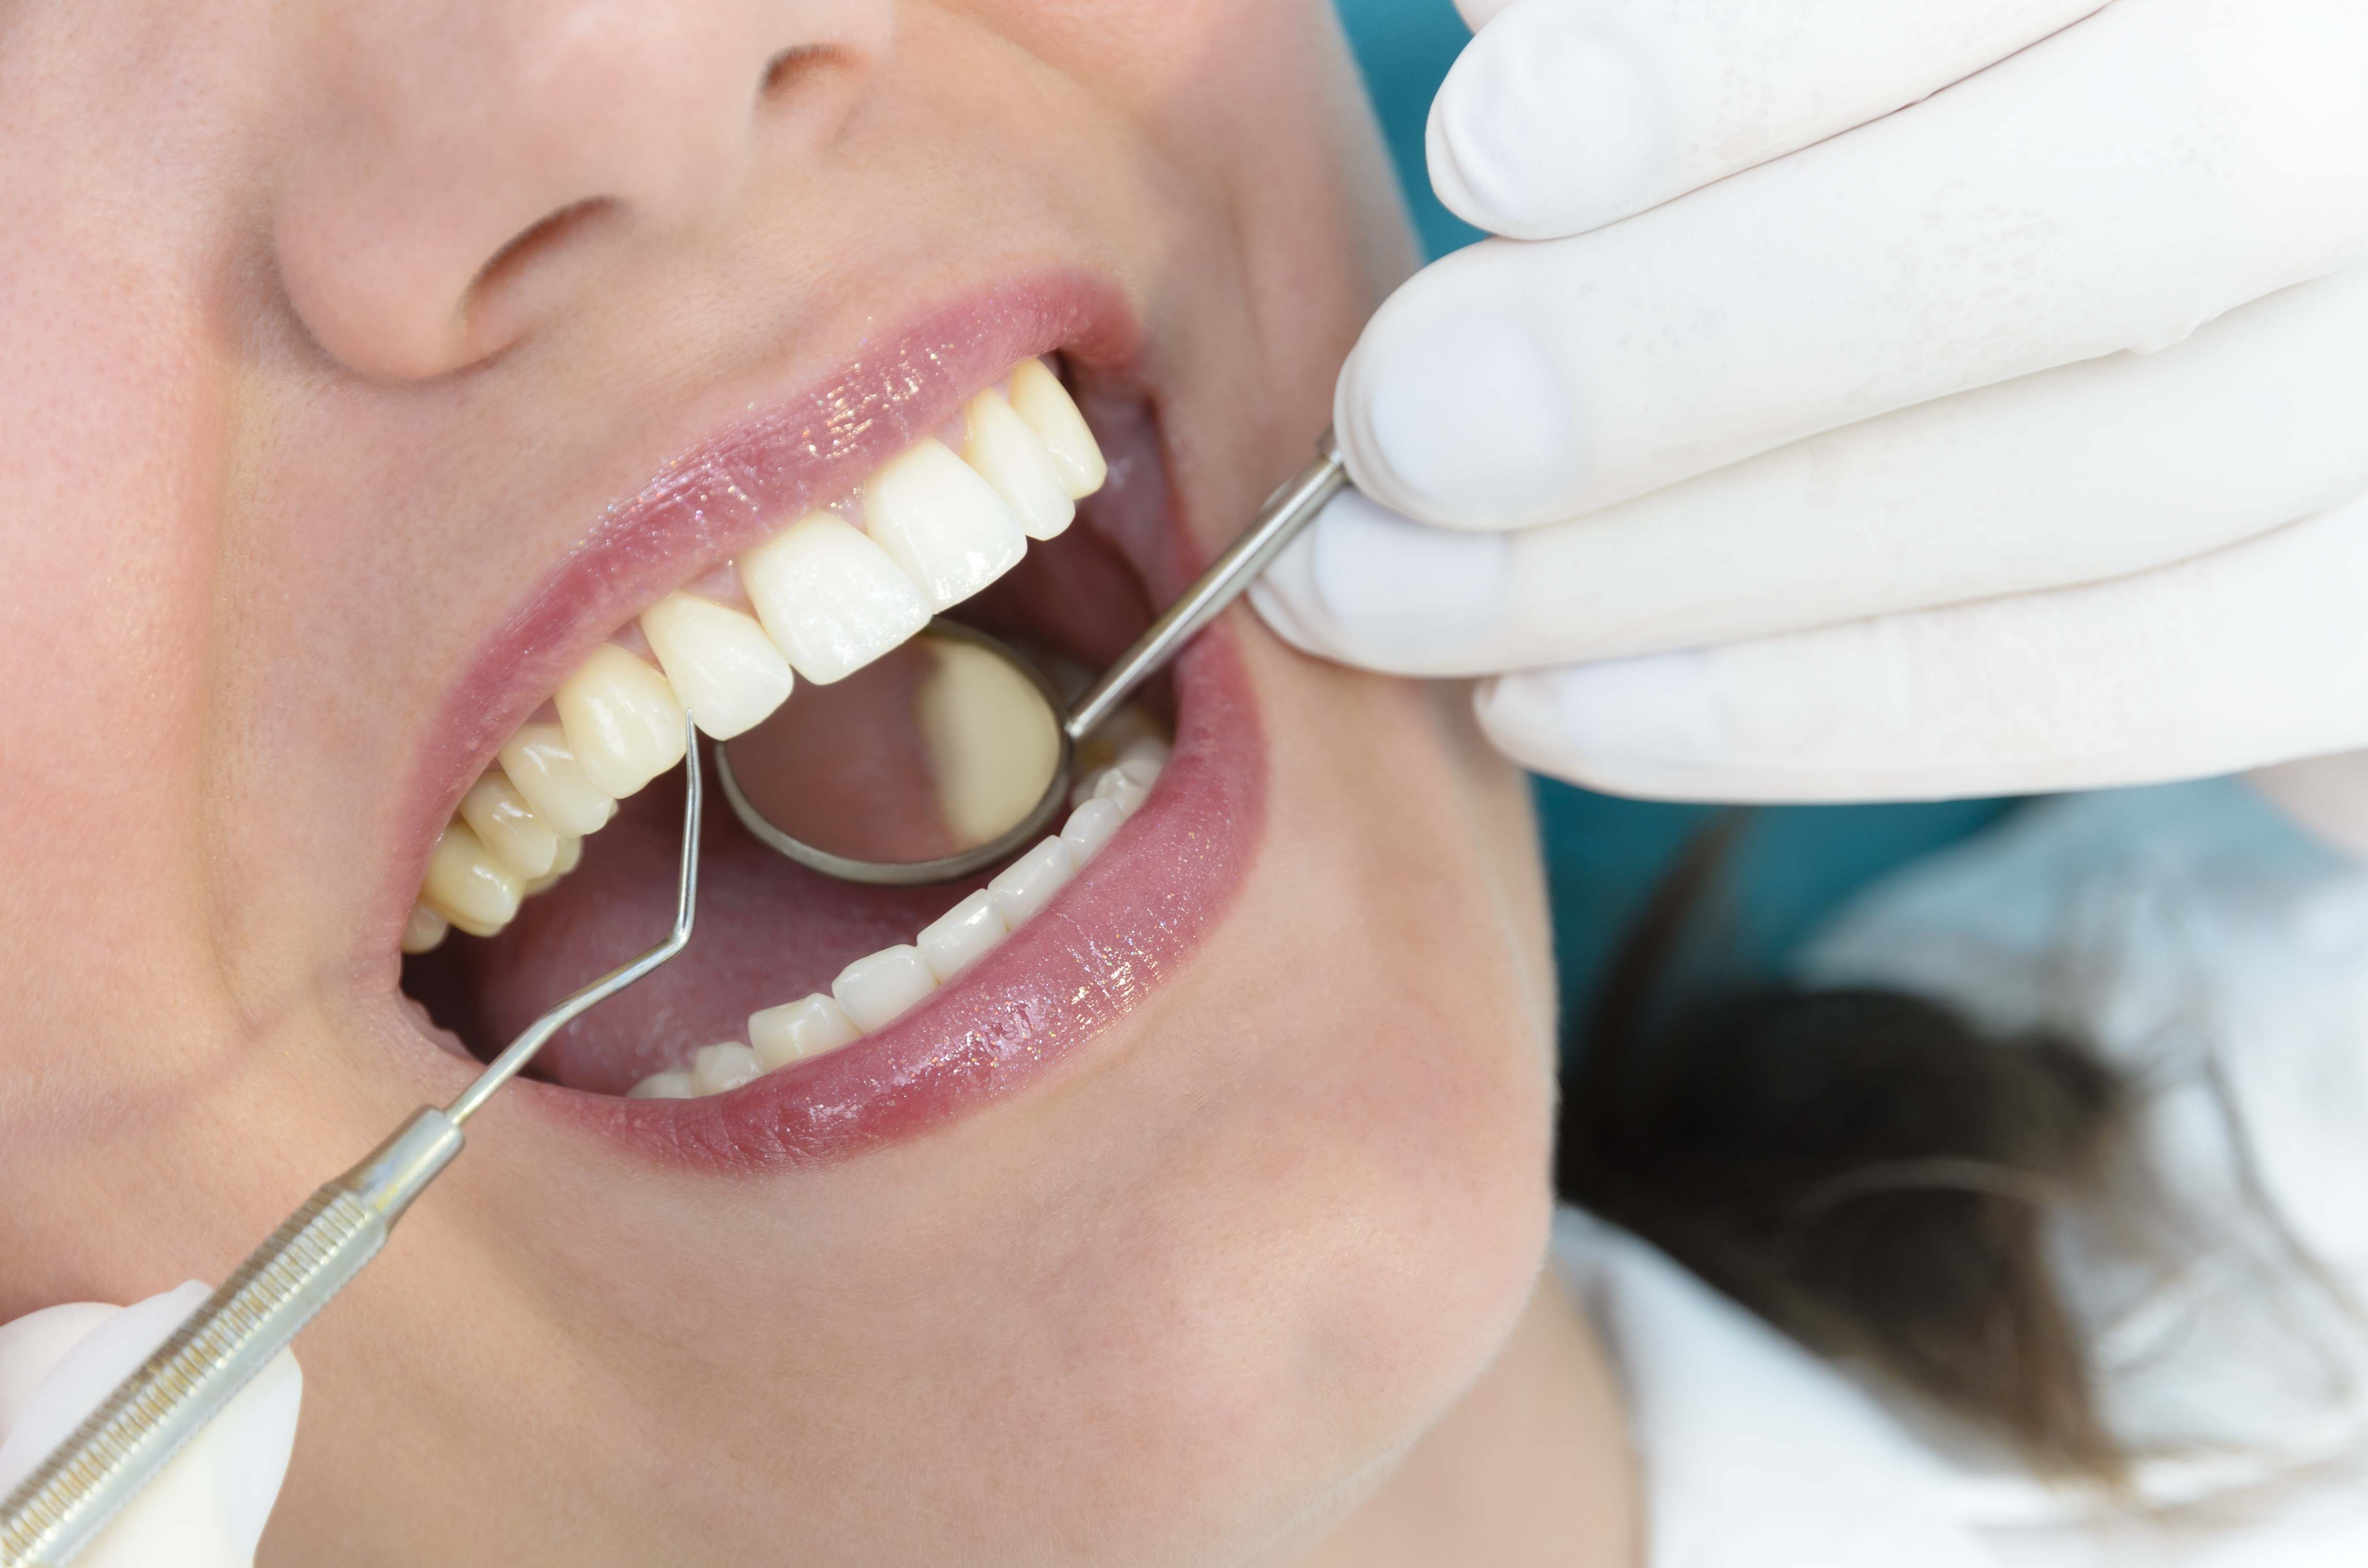 Periodontics in Practice: Where do I start and what should I be doing?